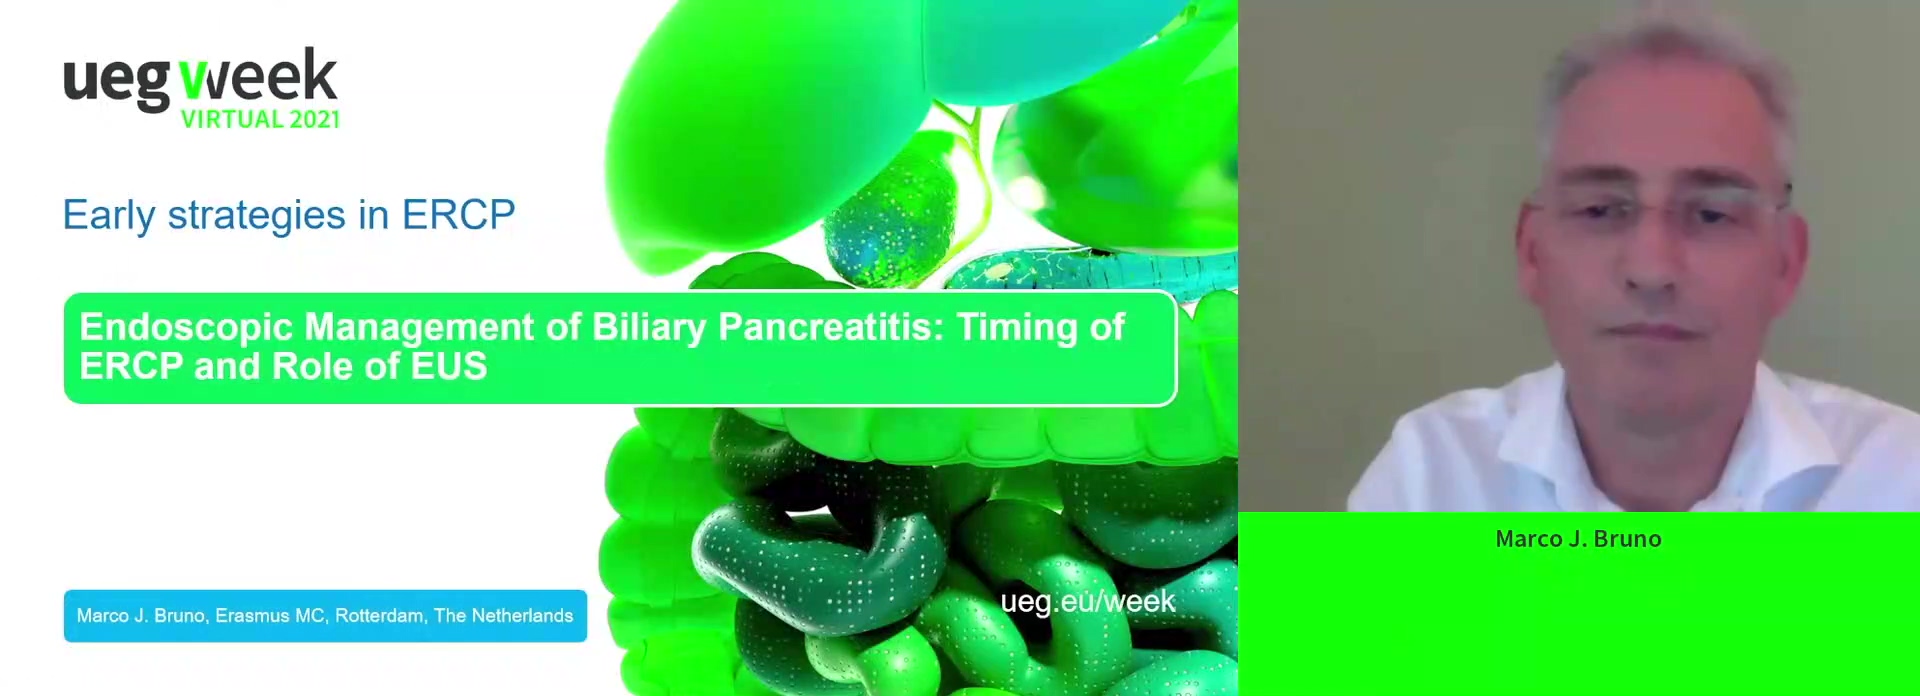 Endoscopic management of biliary pancreatitis: Timing of ERCP and role of EUS